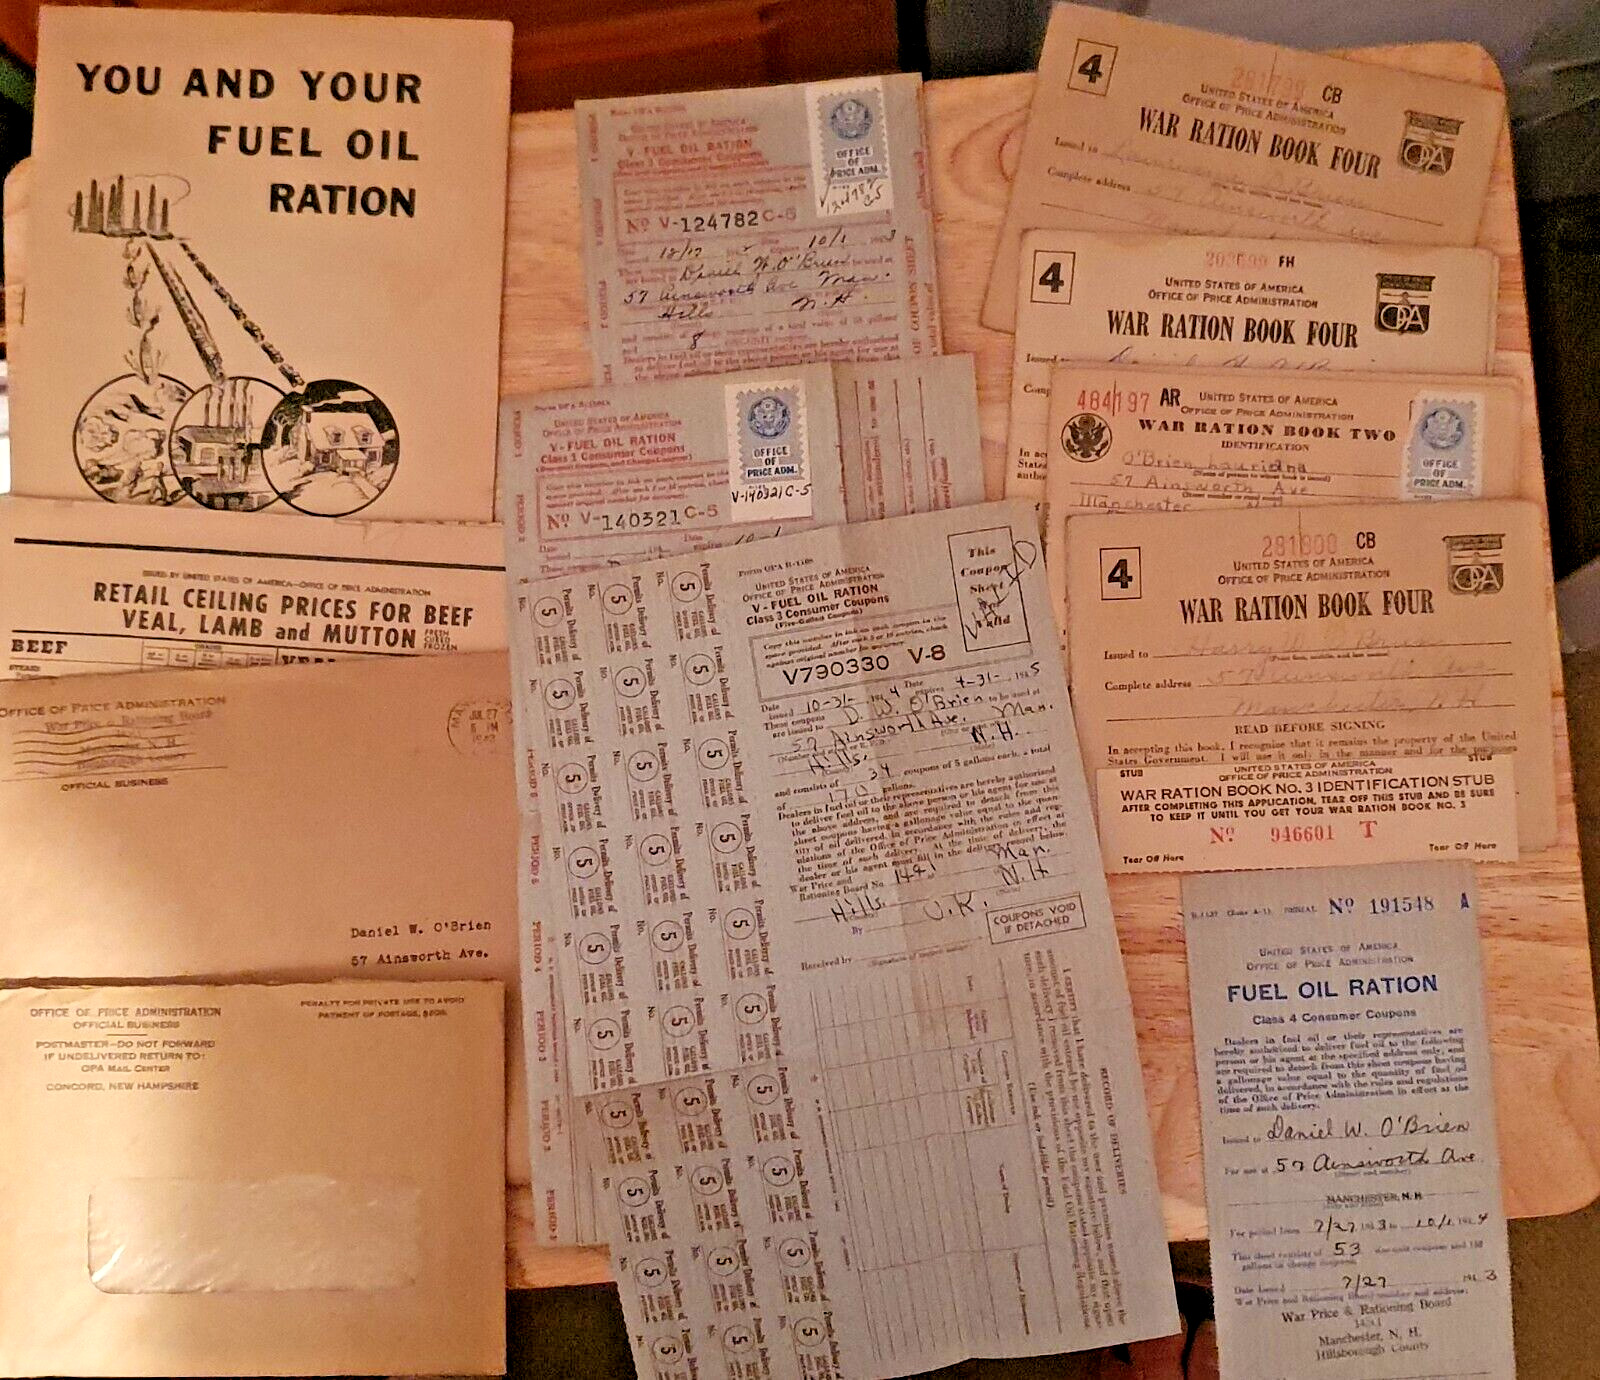 WWII MILITARY PAPERWORK FUEL AND FOOD RATIONS, PUBLICATIONS IN ORIGINAL ENVELOPE